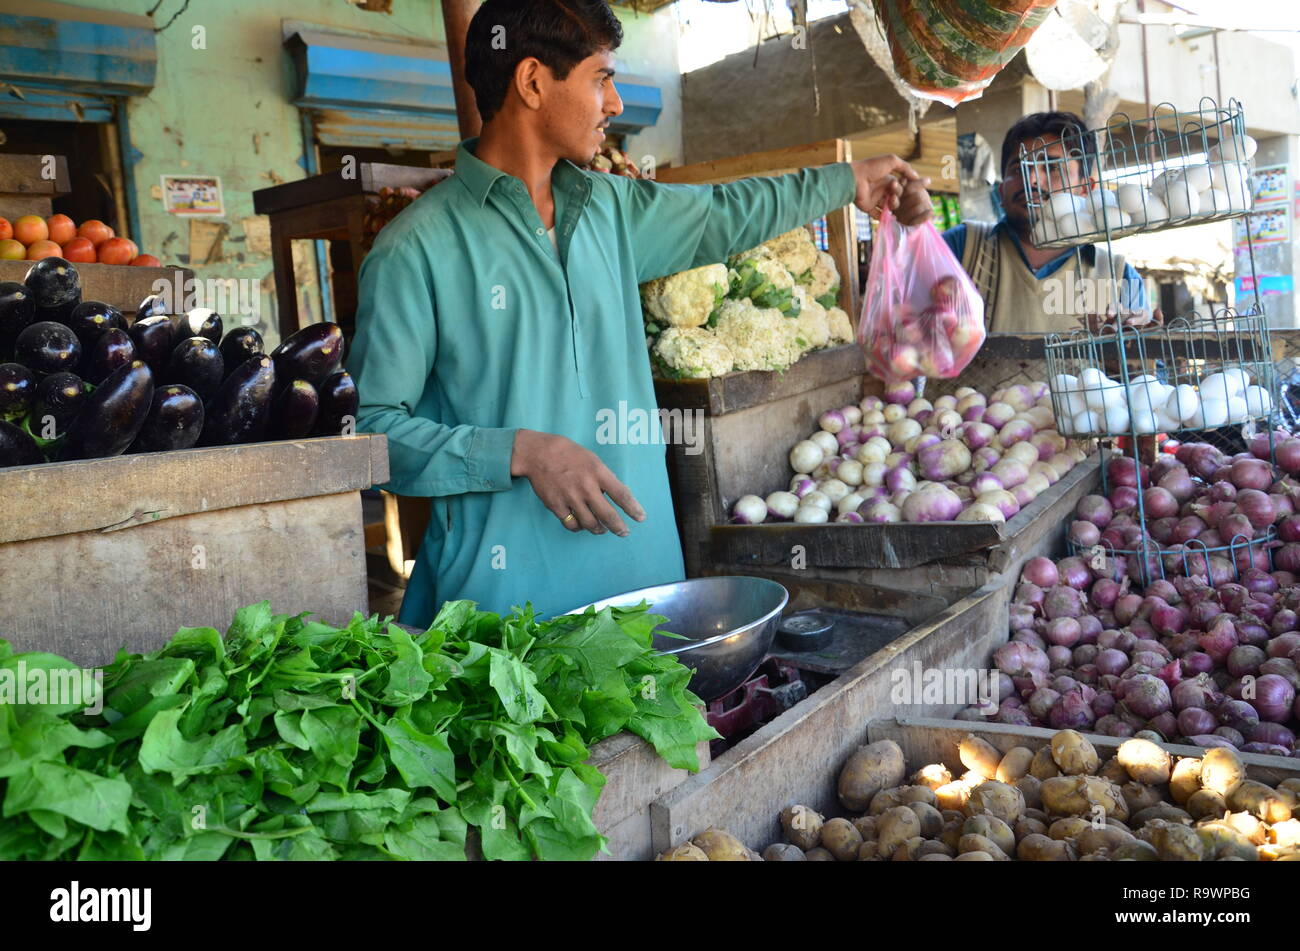 Pakistani shoppers purchase vegetables from a stall inside a